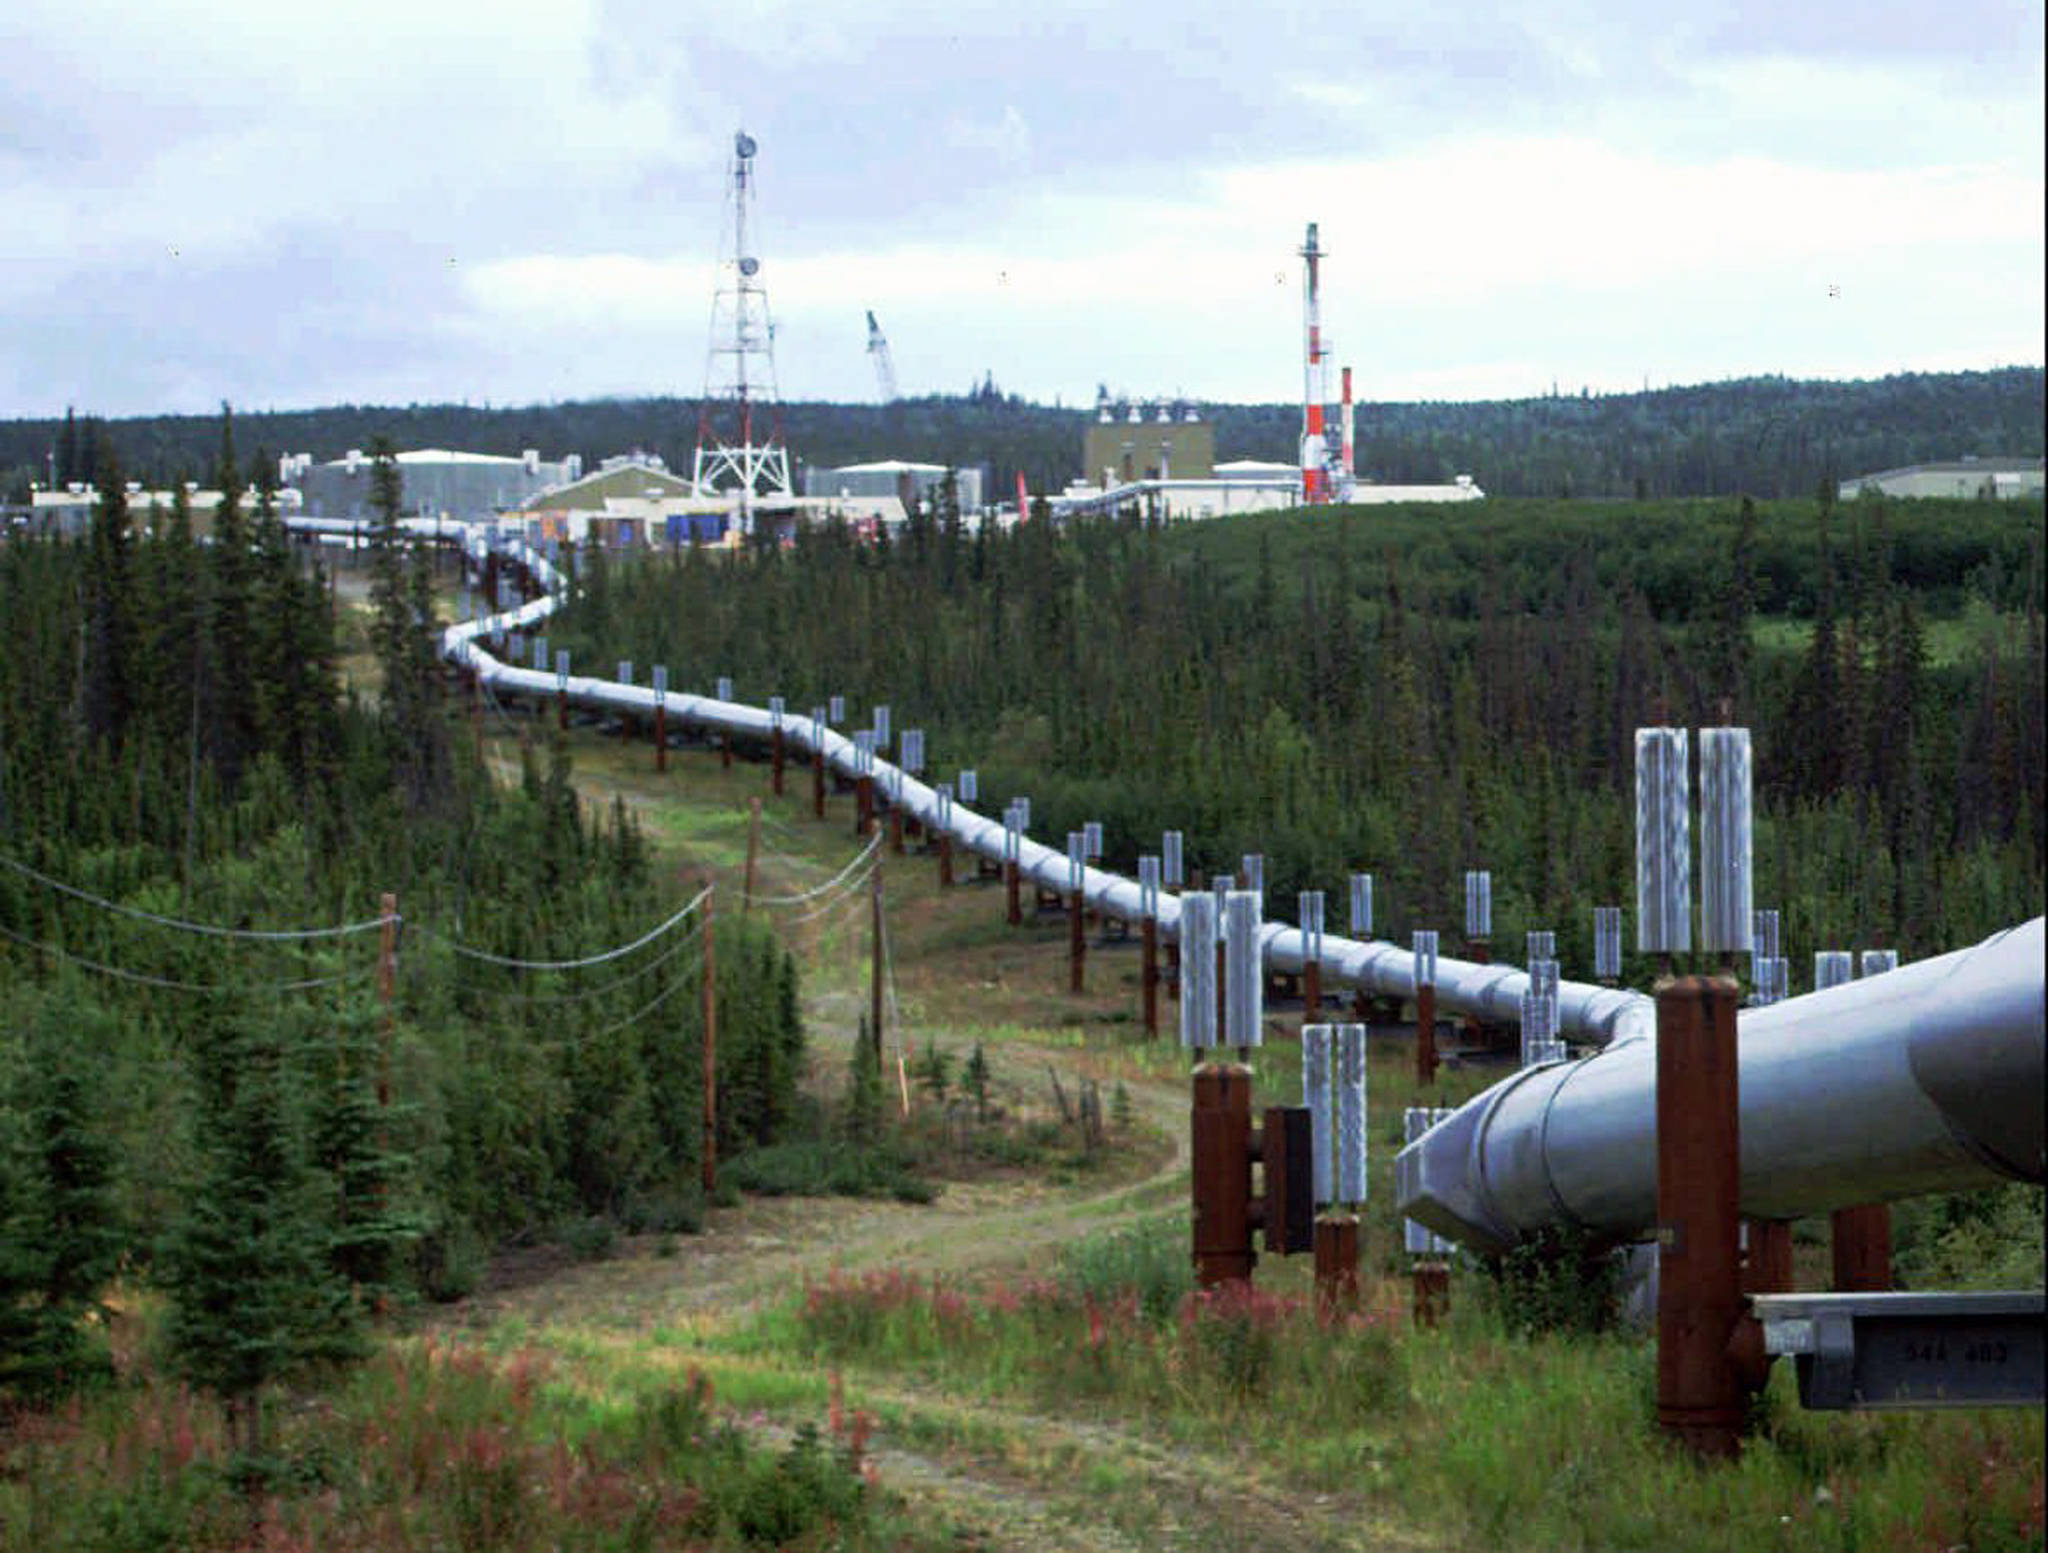 This photo shows the Trans-Alaska pipeline and pump station north of Fairbanks, Alaska. The future of Alaska’s unique program of paying residents an annual check is in question, with oil prices low and an economy struggling during the coronavirus pandemic. (AP Photo | Al Grillo, File)